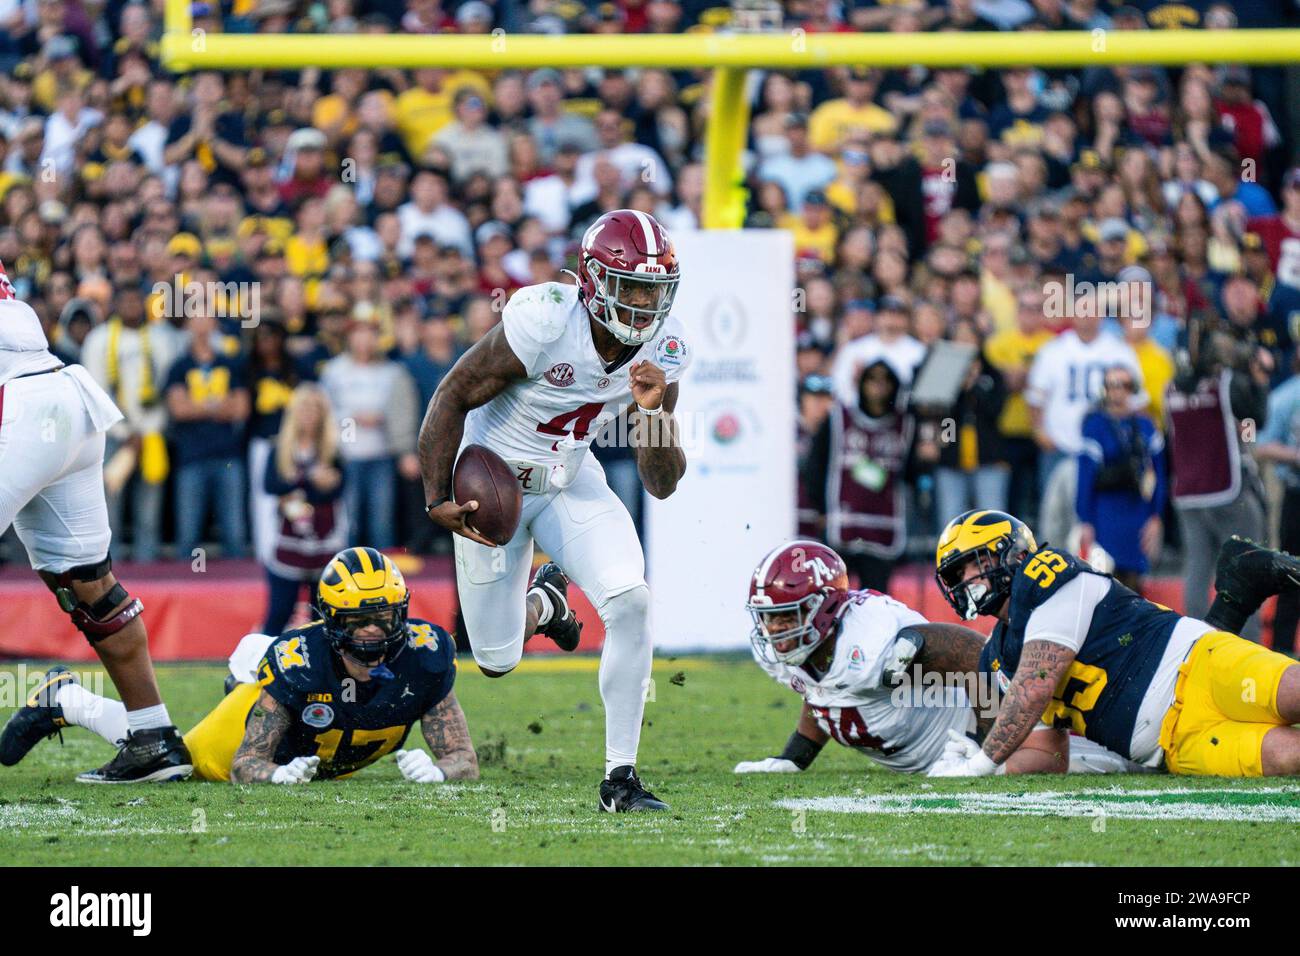 Alabama Crimson Tide quarterback Jalen Milroe (4) runs the ball during the CFP Semifinal at the Rose Bowl Game against the Michigan Wolverines, Monday Stock Photo